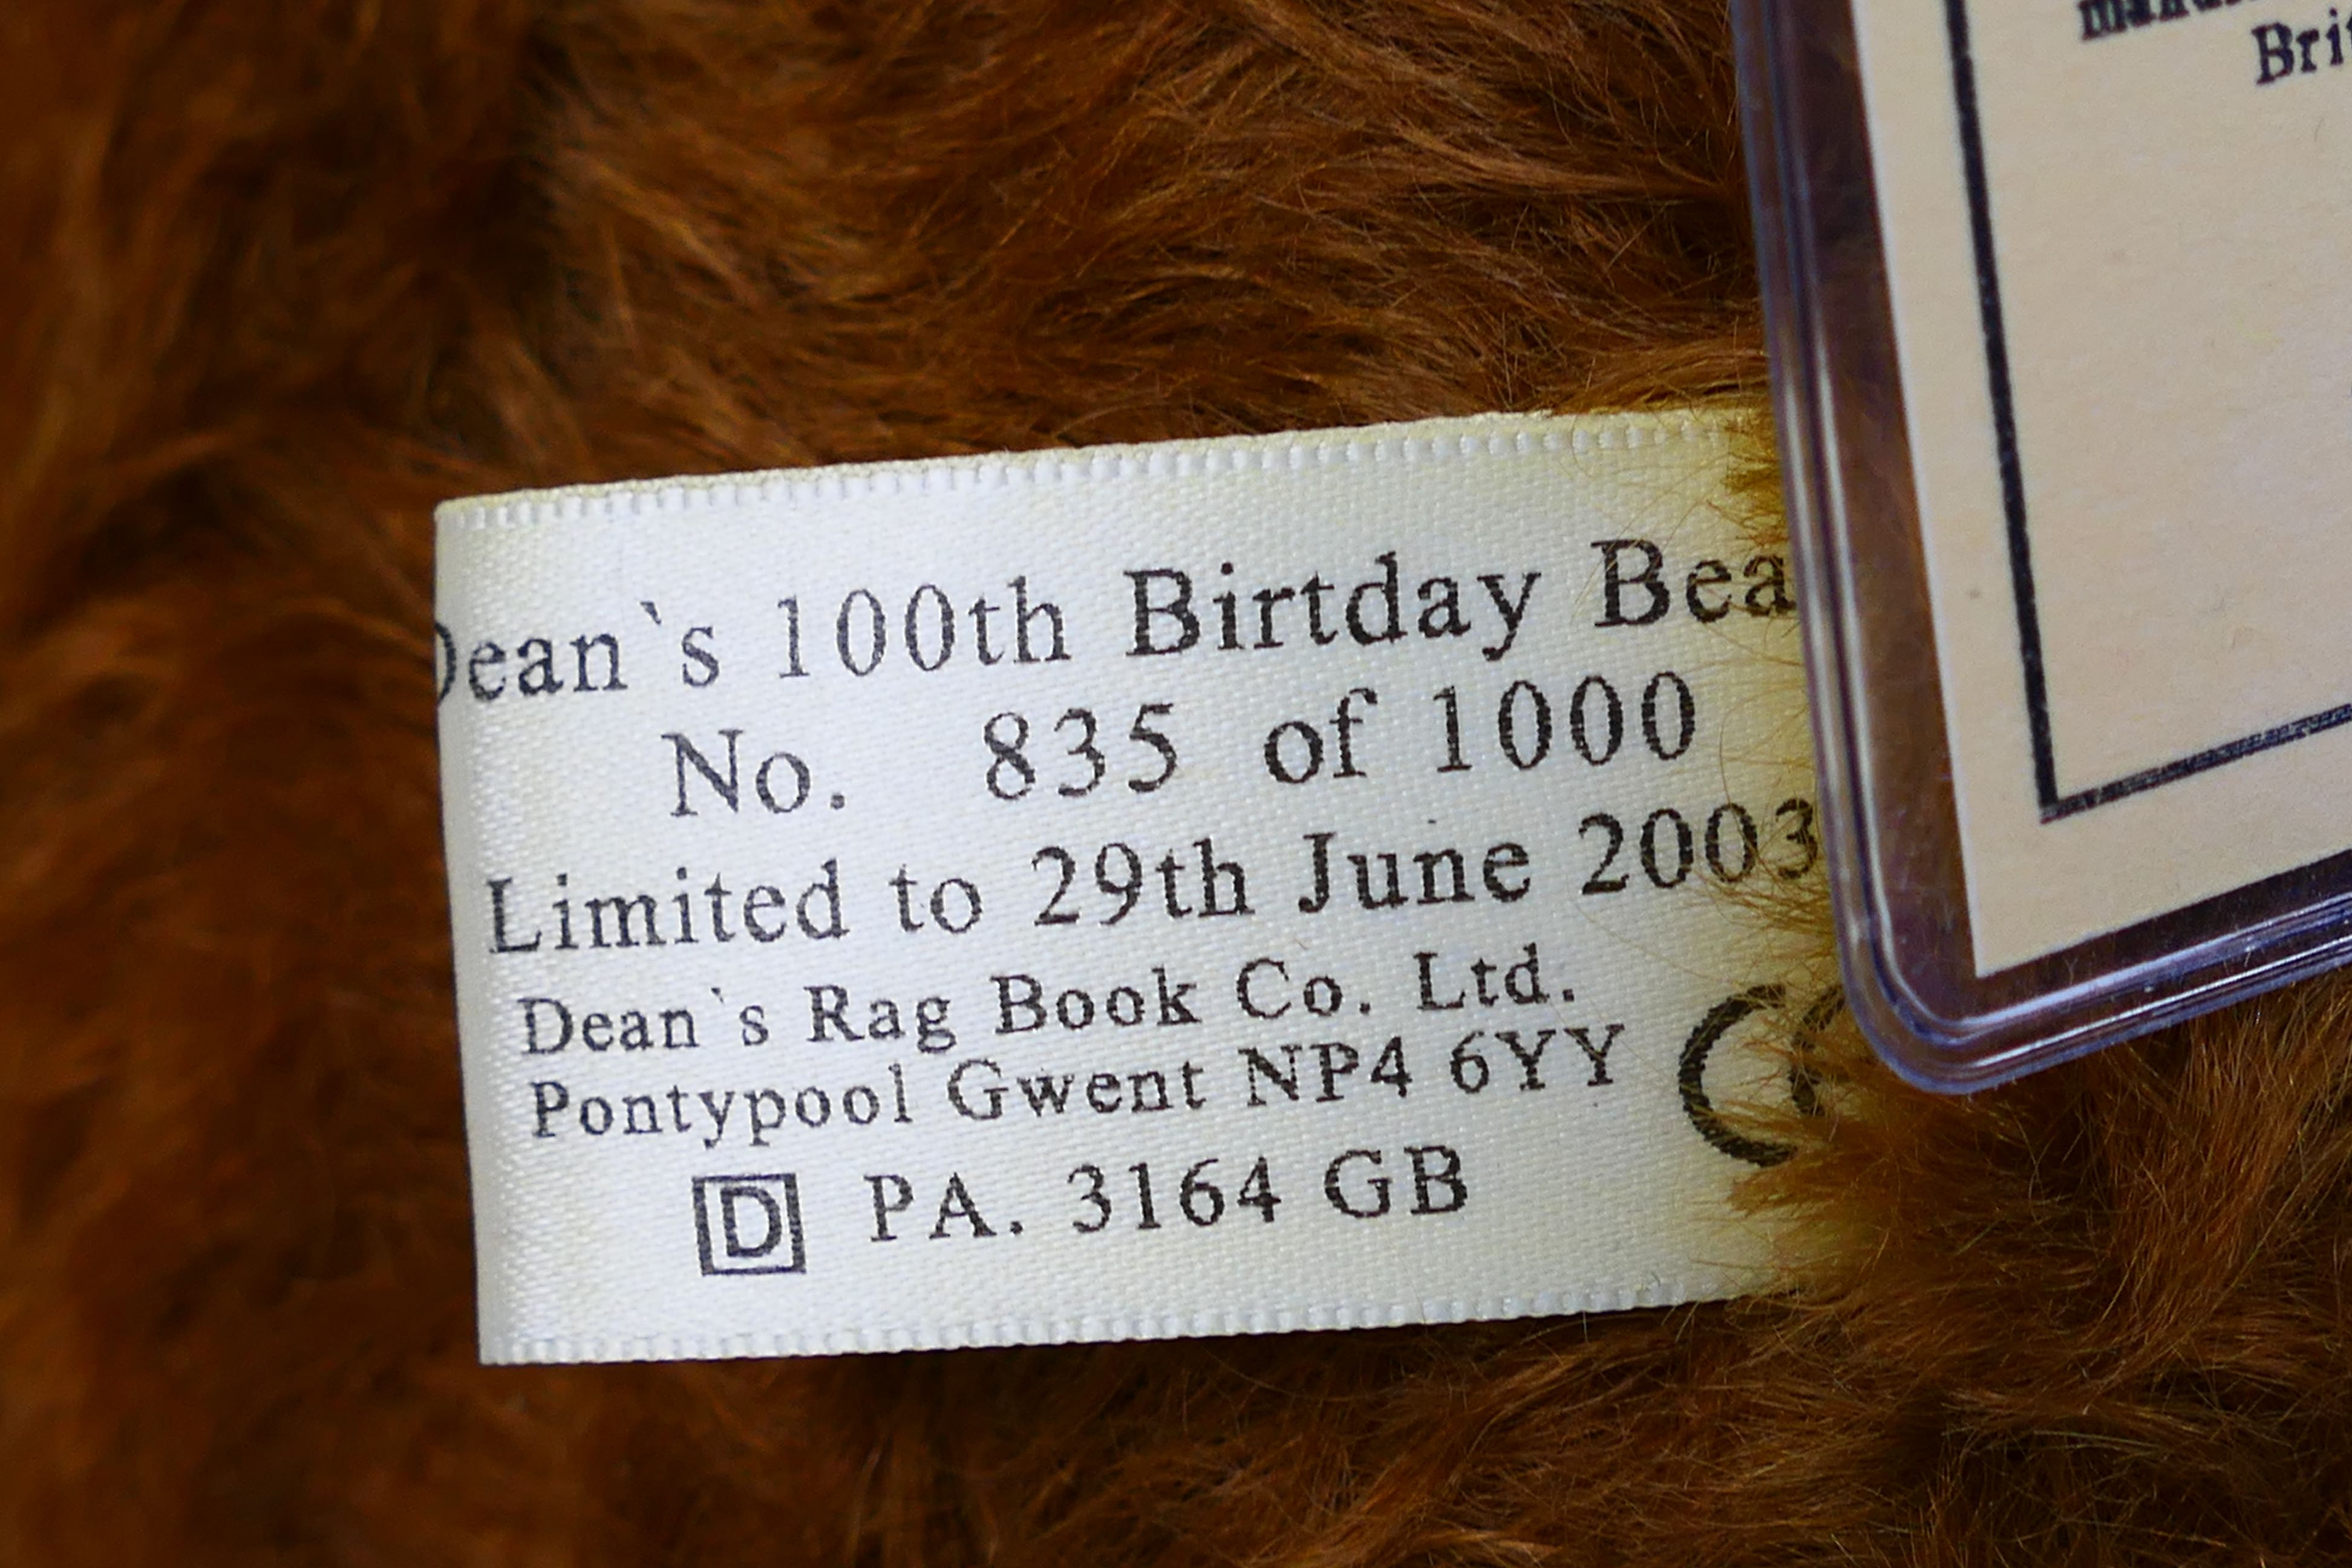 Deans Rag Book - A boxed limited edition 2003 Centenary bear named 100th Birthday Bear number 835 - Image 8 of 9